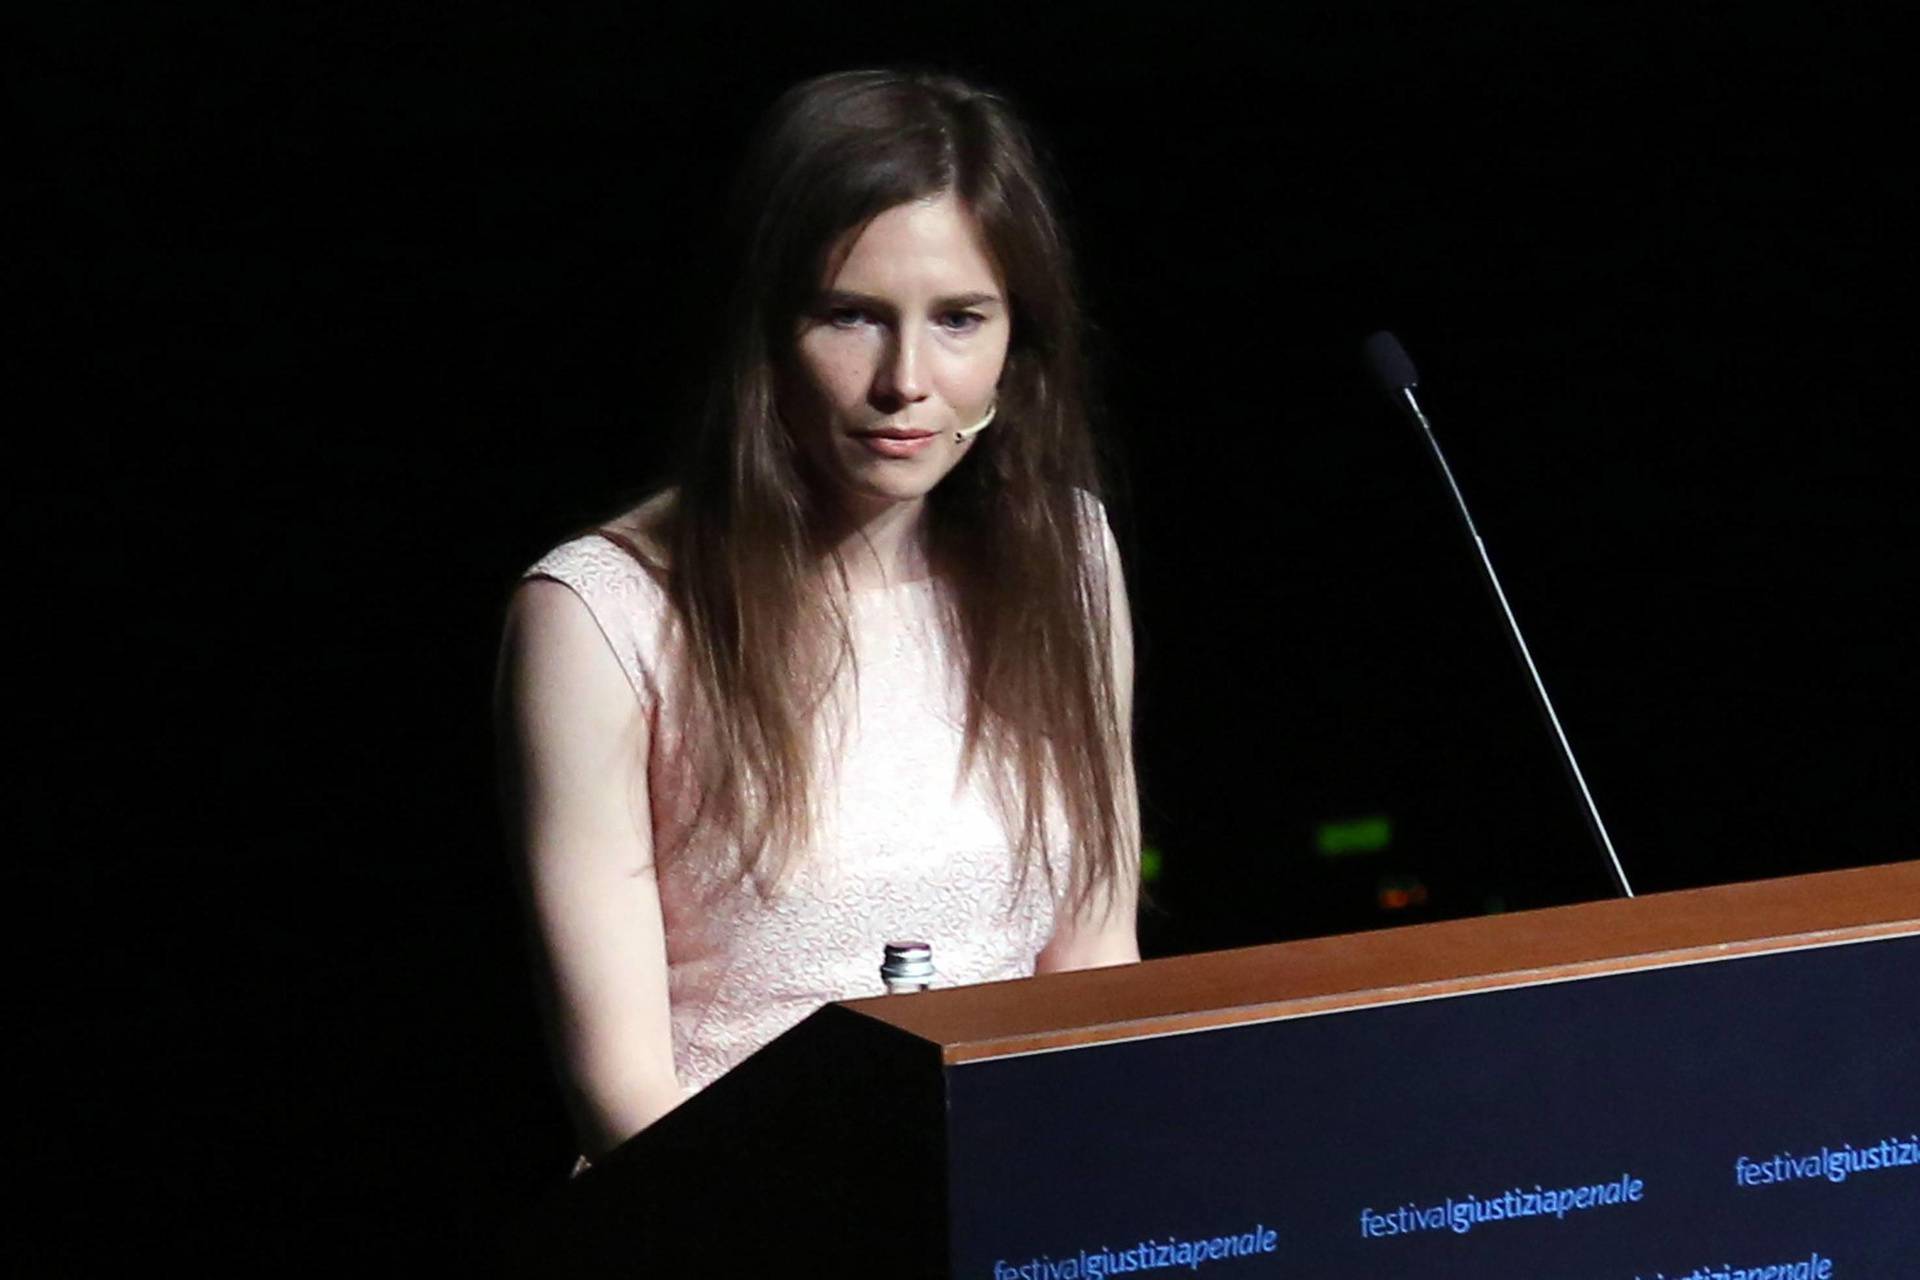 AMANDA KNOX DURING ITS INTERVENTION AT THE FESTIVAL OF CRIMINAL JUSTICE